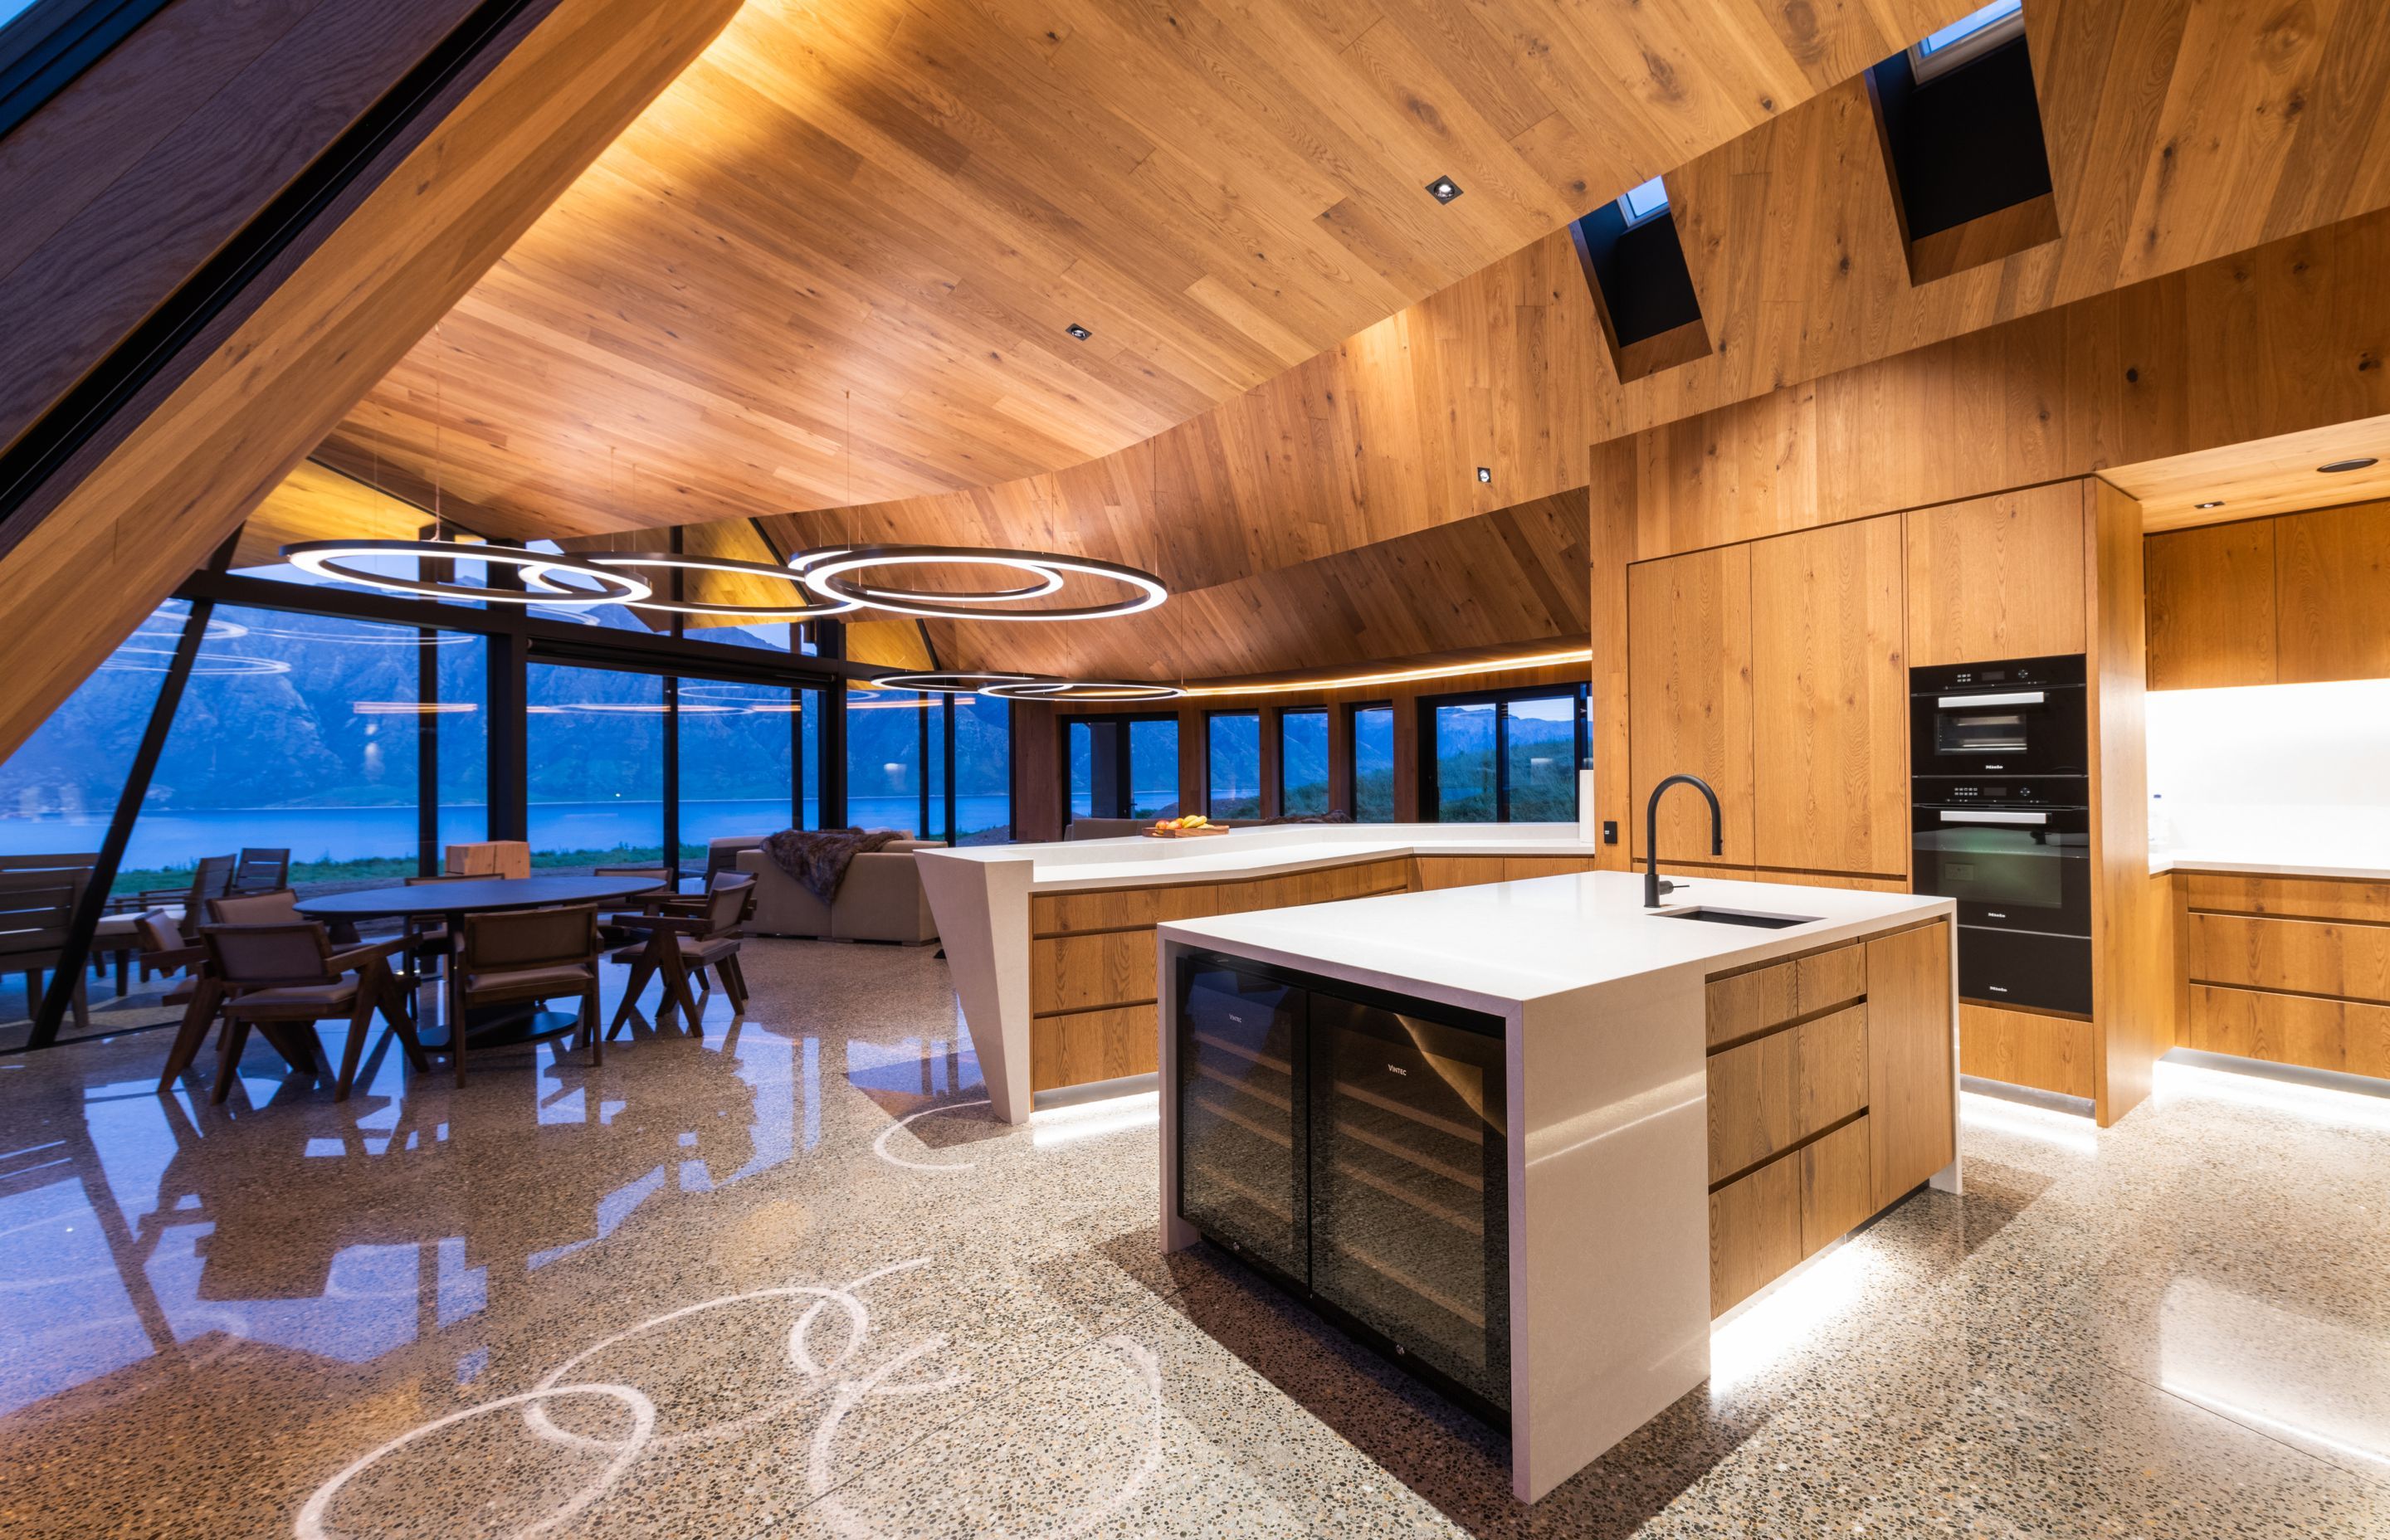 Creating a 'residential-scale' experience was key to the design, however, commercial-level finishes have been employed, especially in the kitchen.